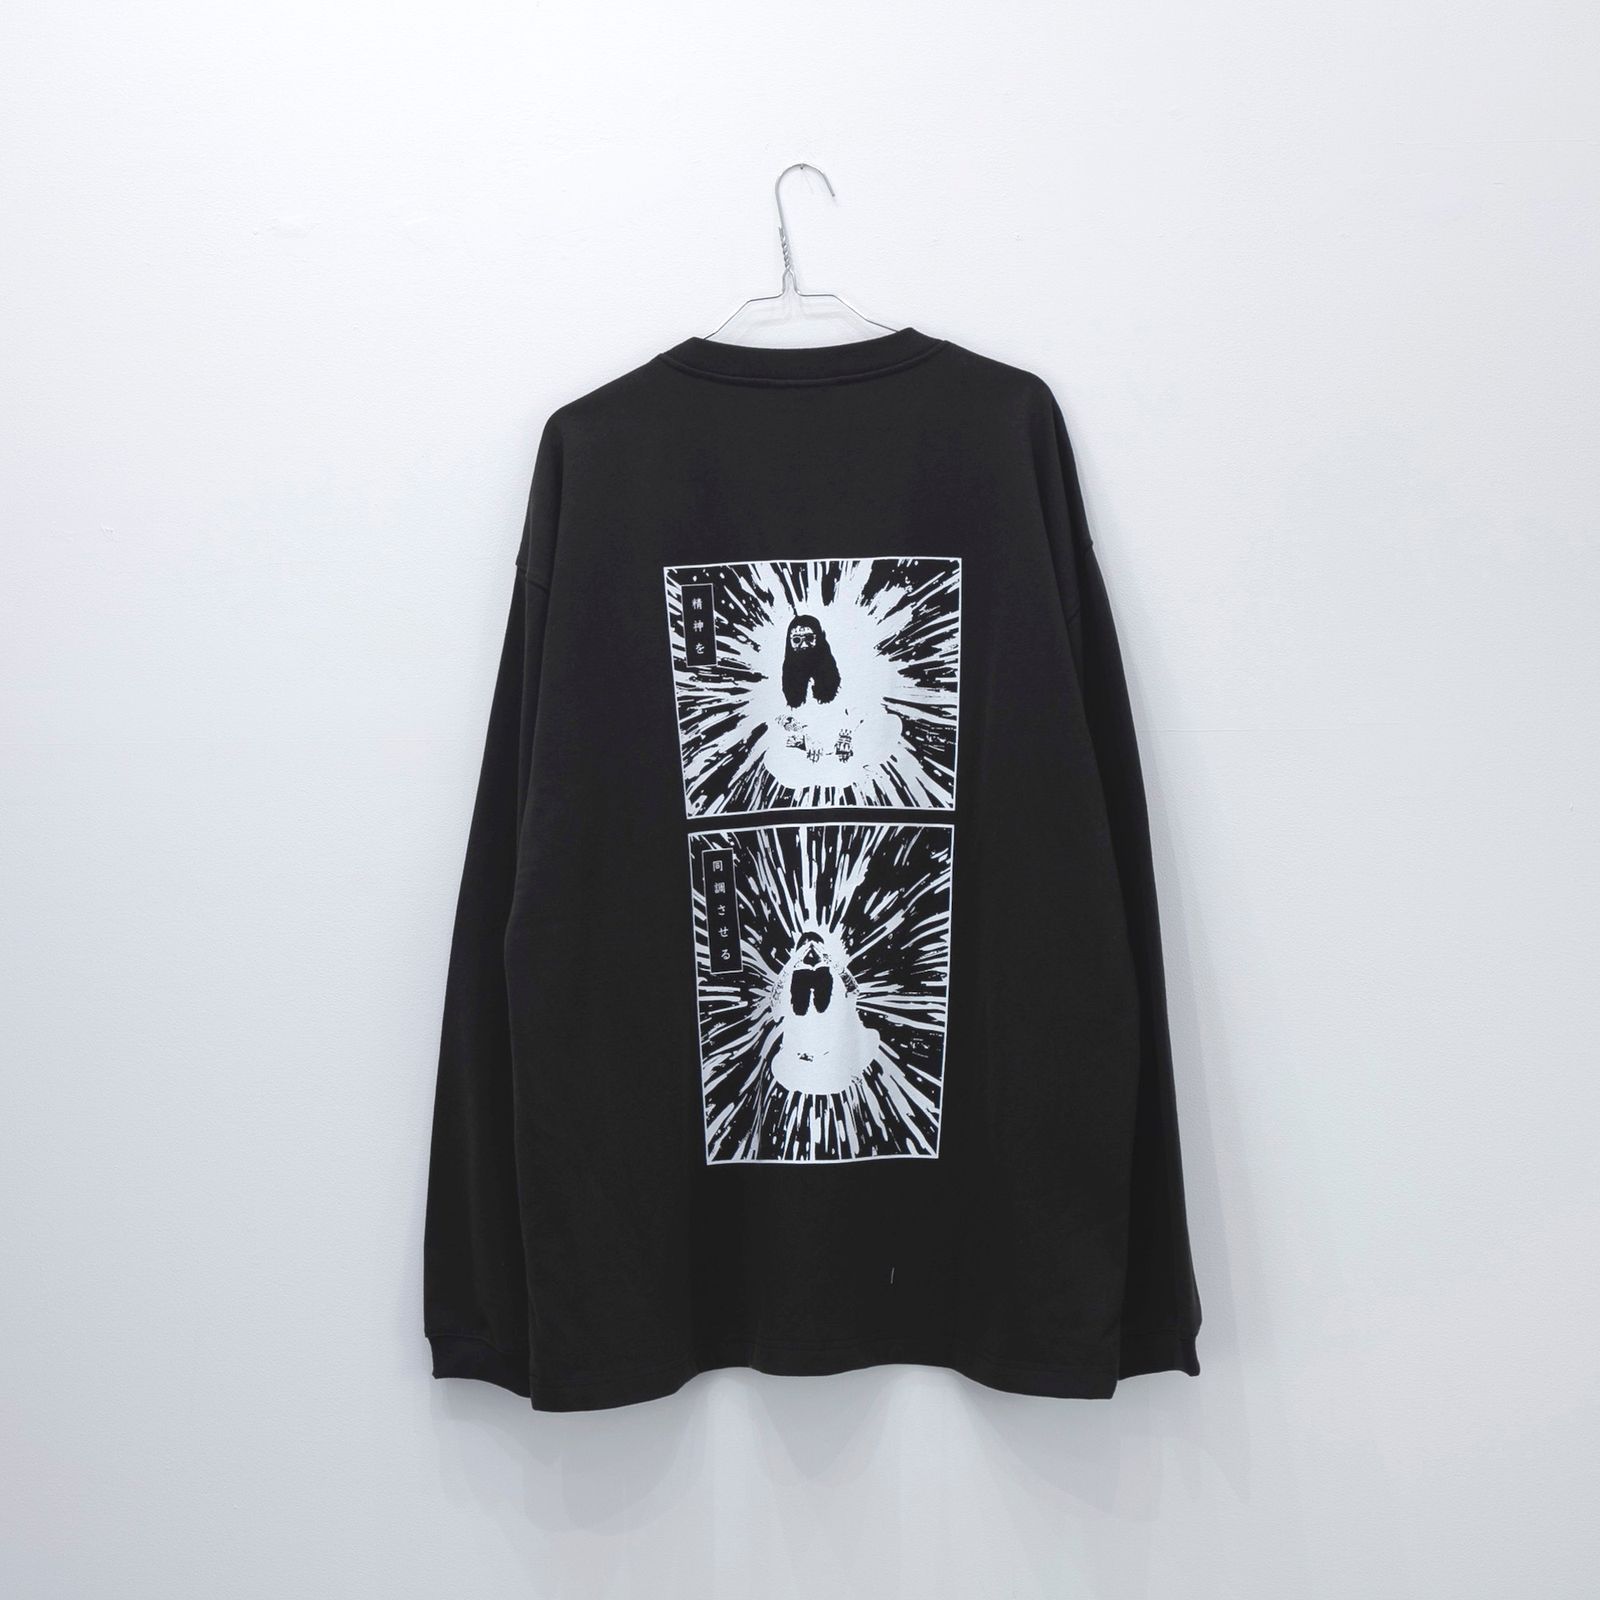 NISHIMOTO IS THE MOUTH - 【残りわずか】Comic L/S Tee | ACRMTSM ...